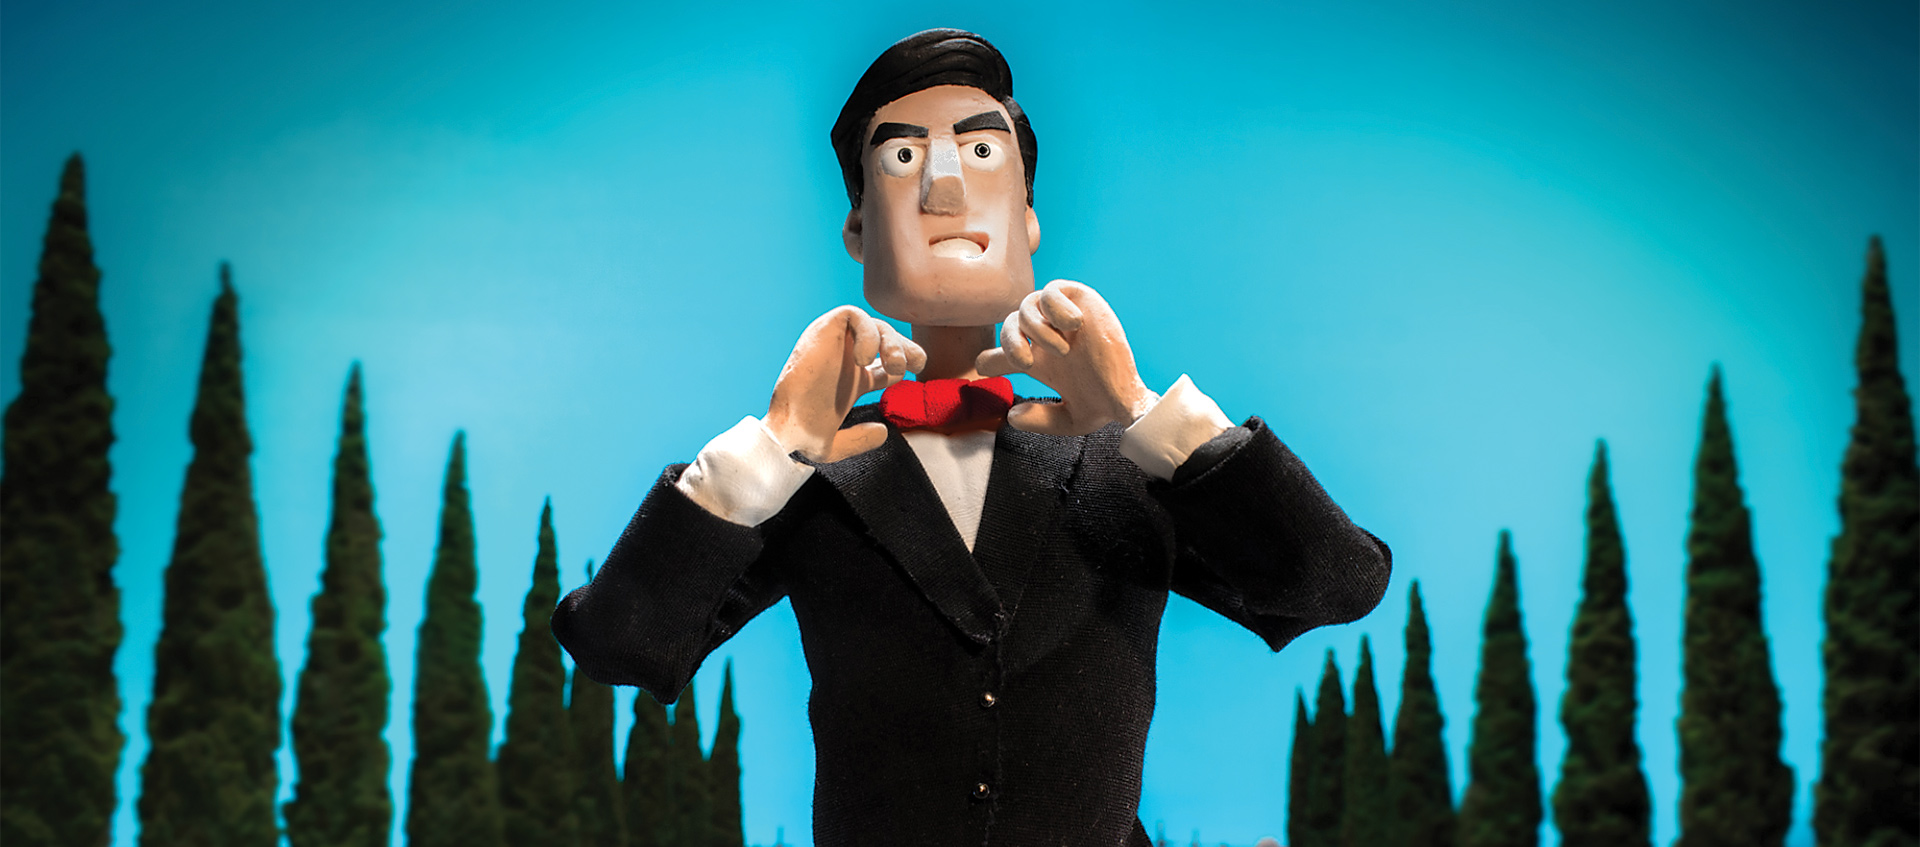 a cartoon of a man in a tuxedo, adjusting his red bow tie